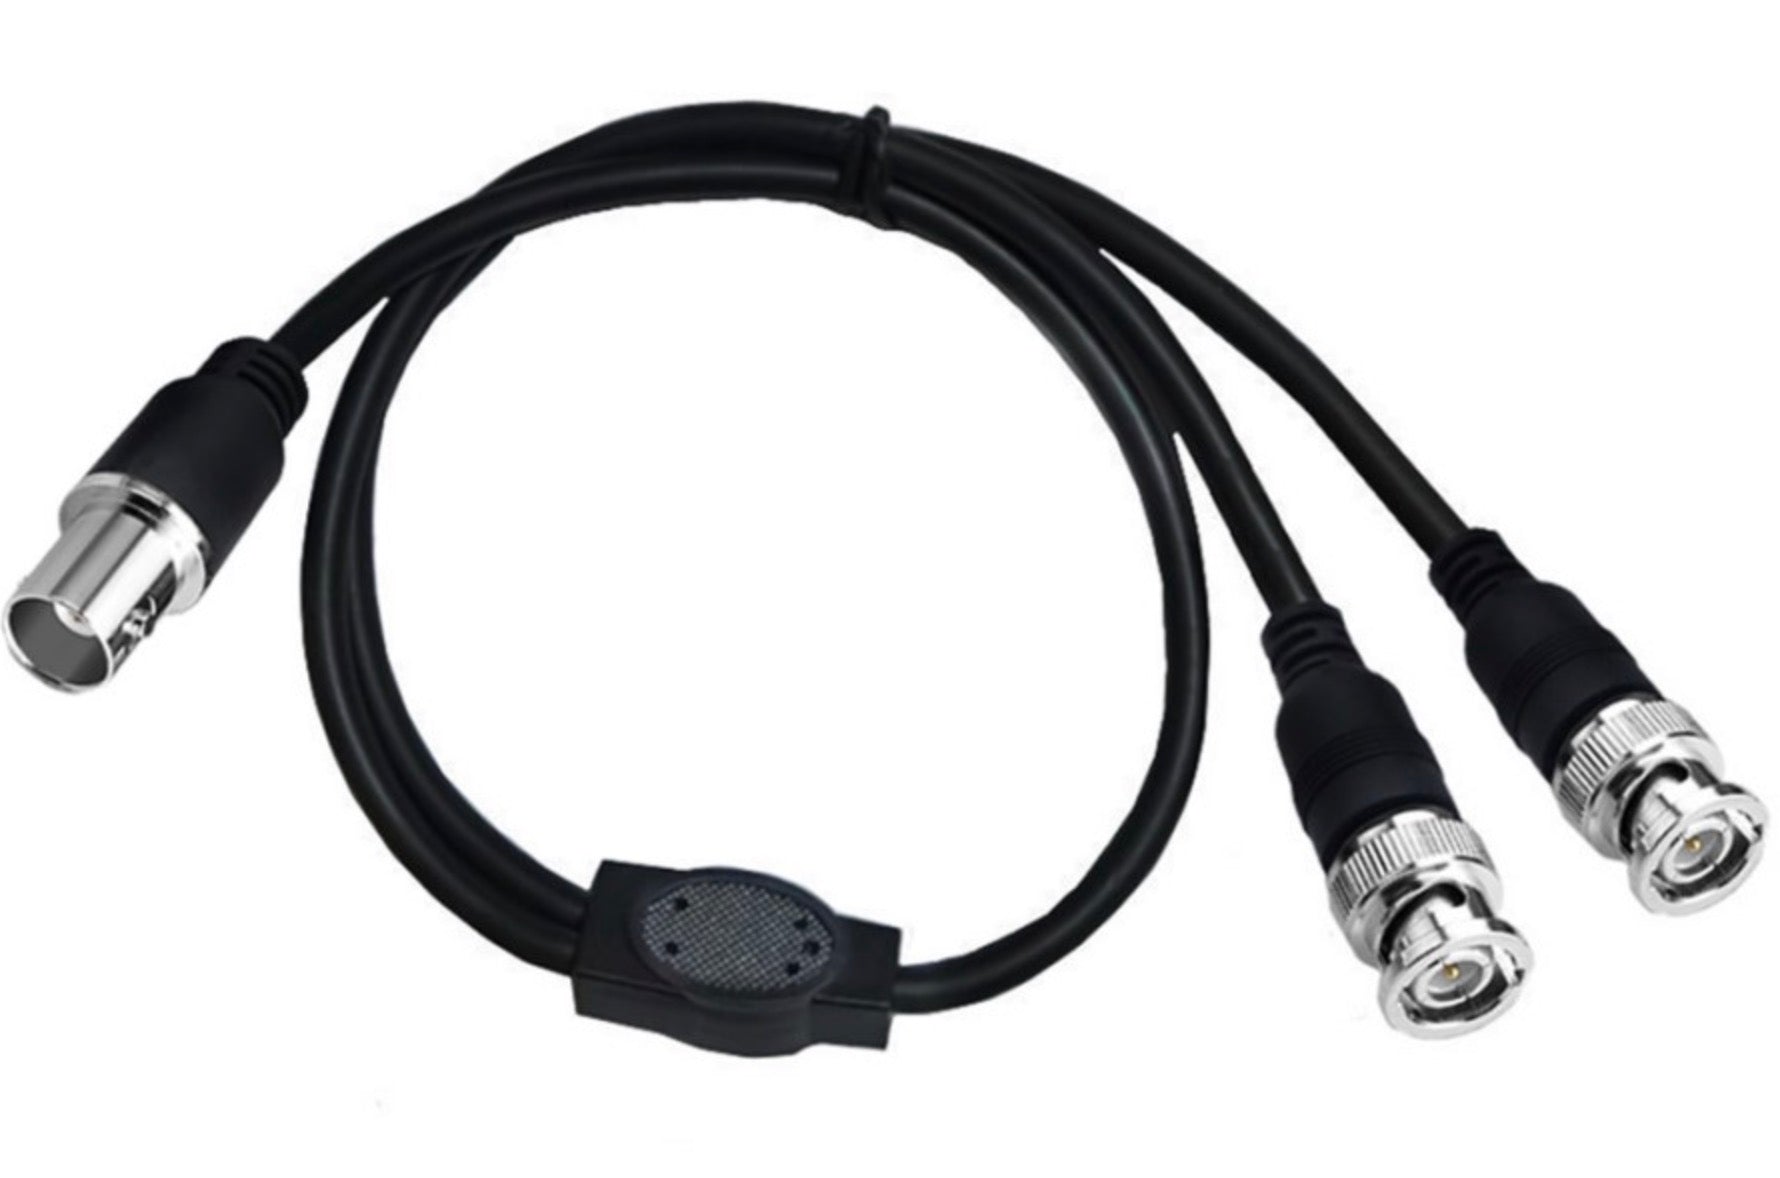 BNC to Dual BNC Cable for Cameras Video Equipment 0.5m